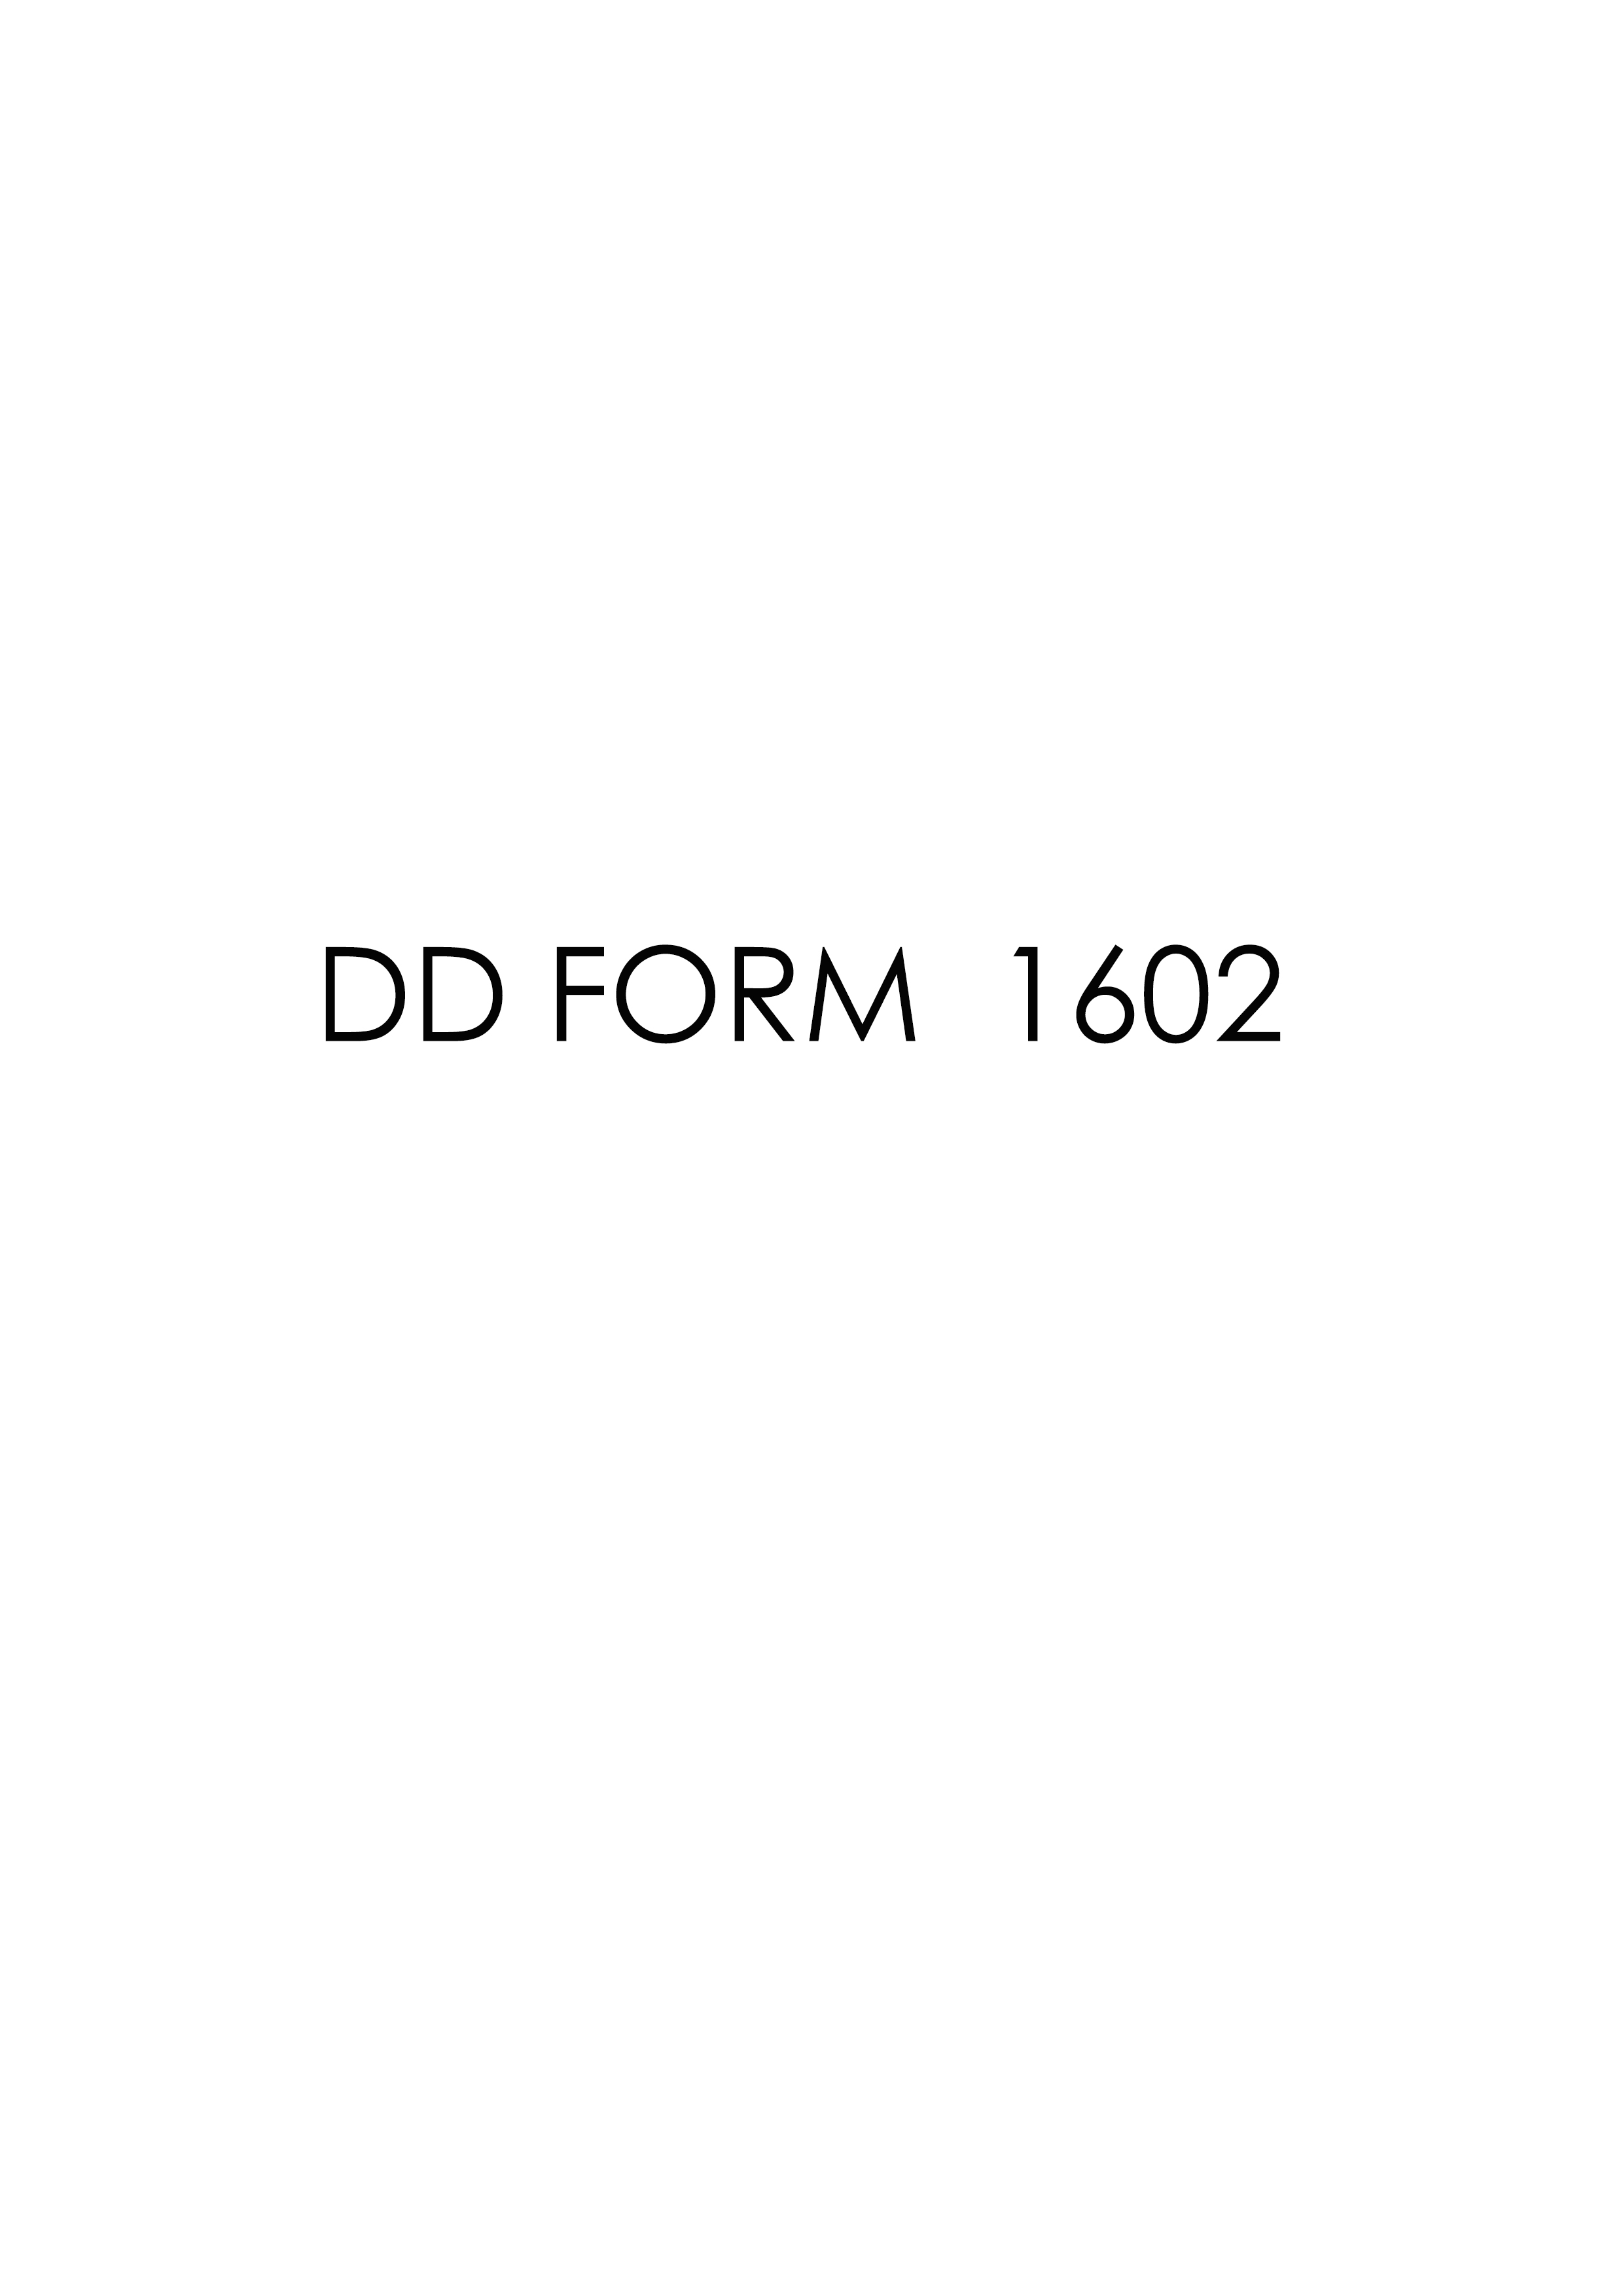 Download Fillable dd Form 1602